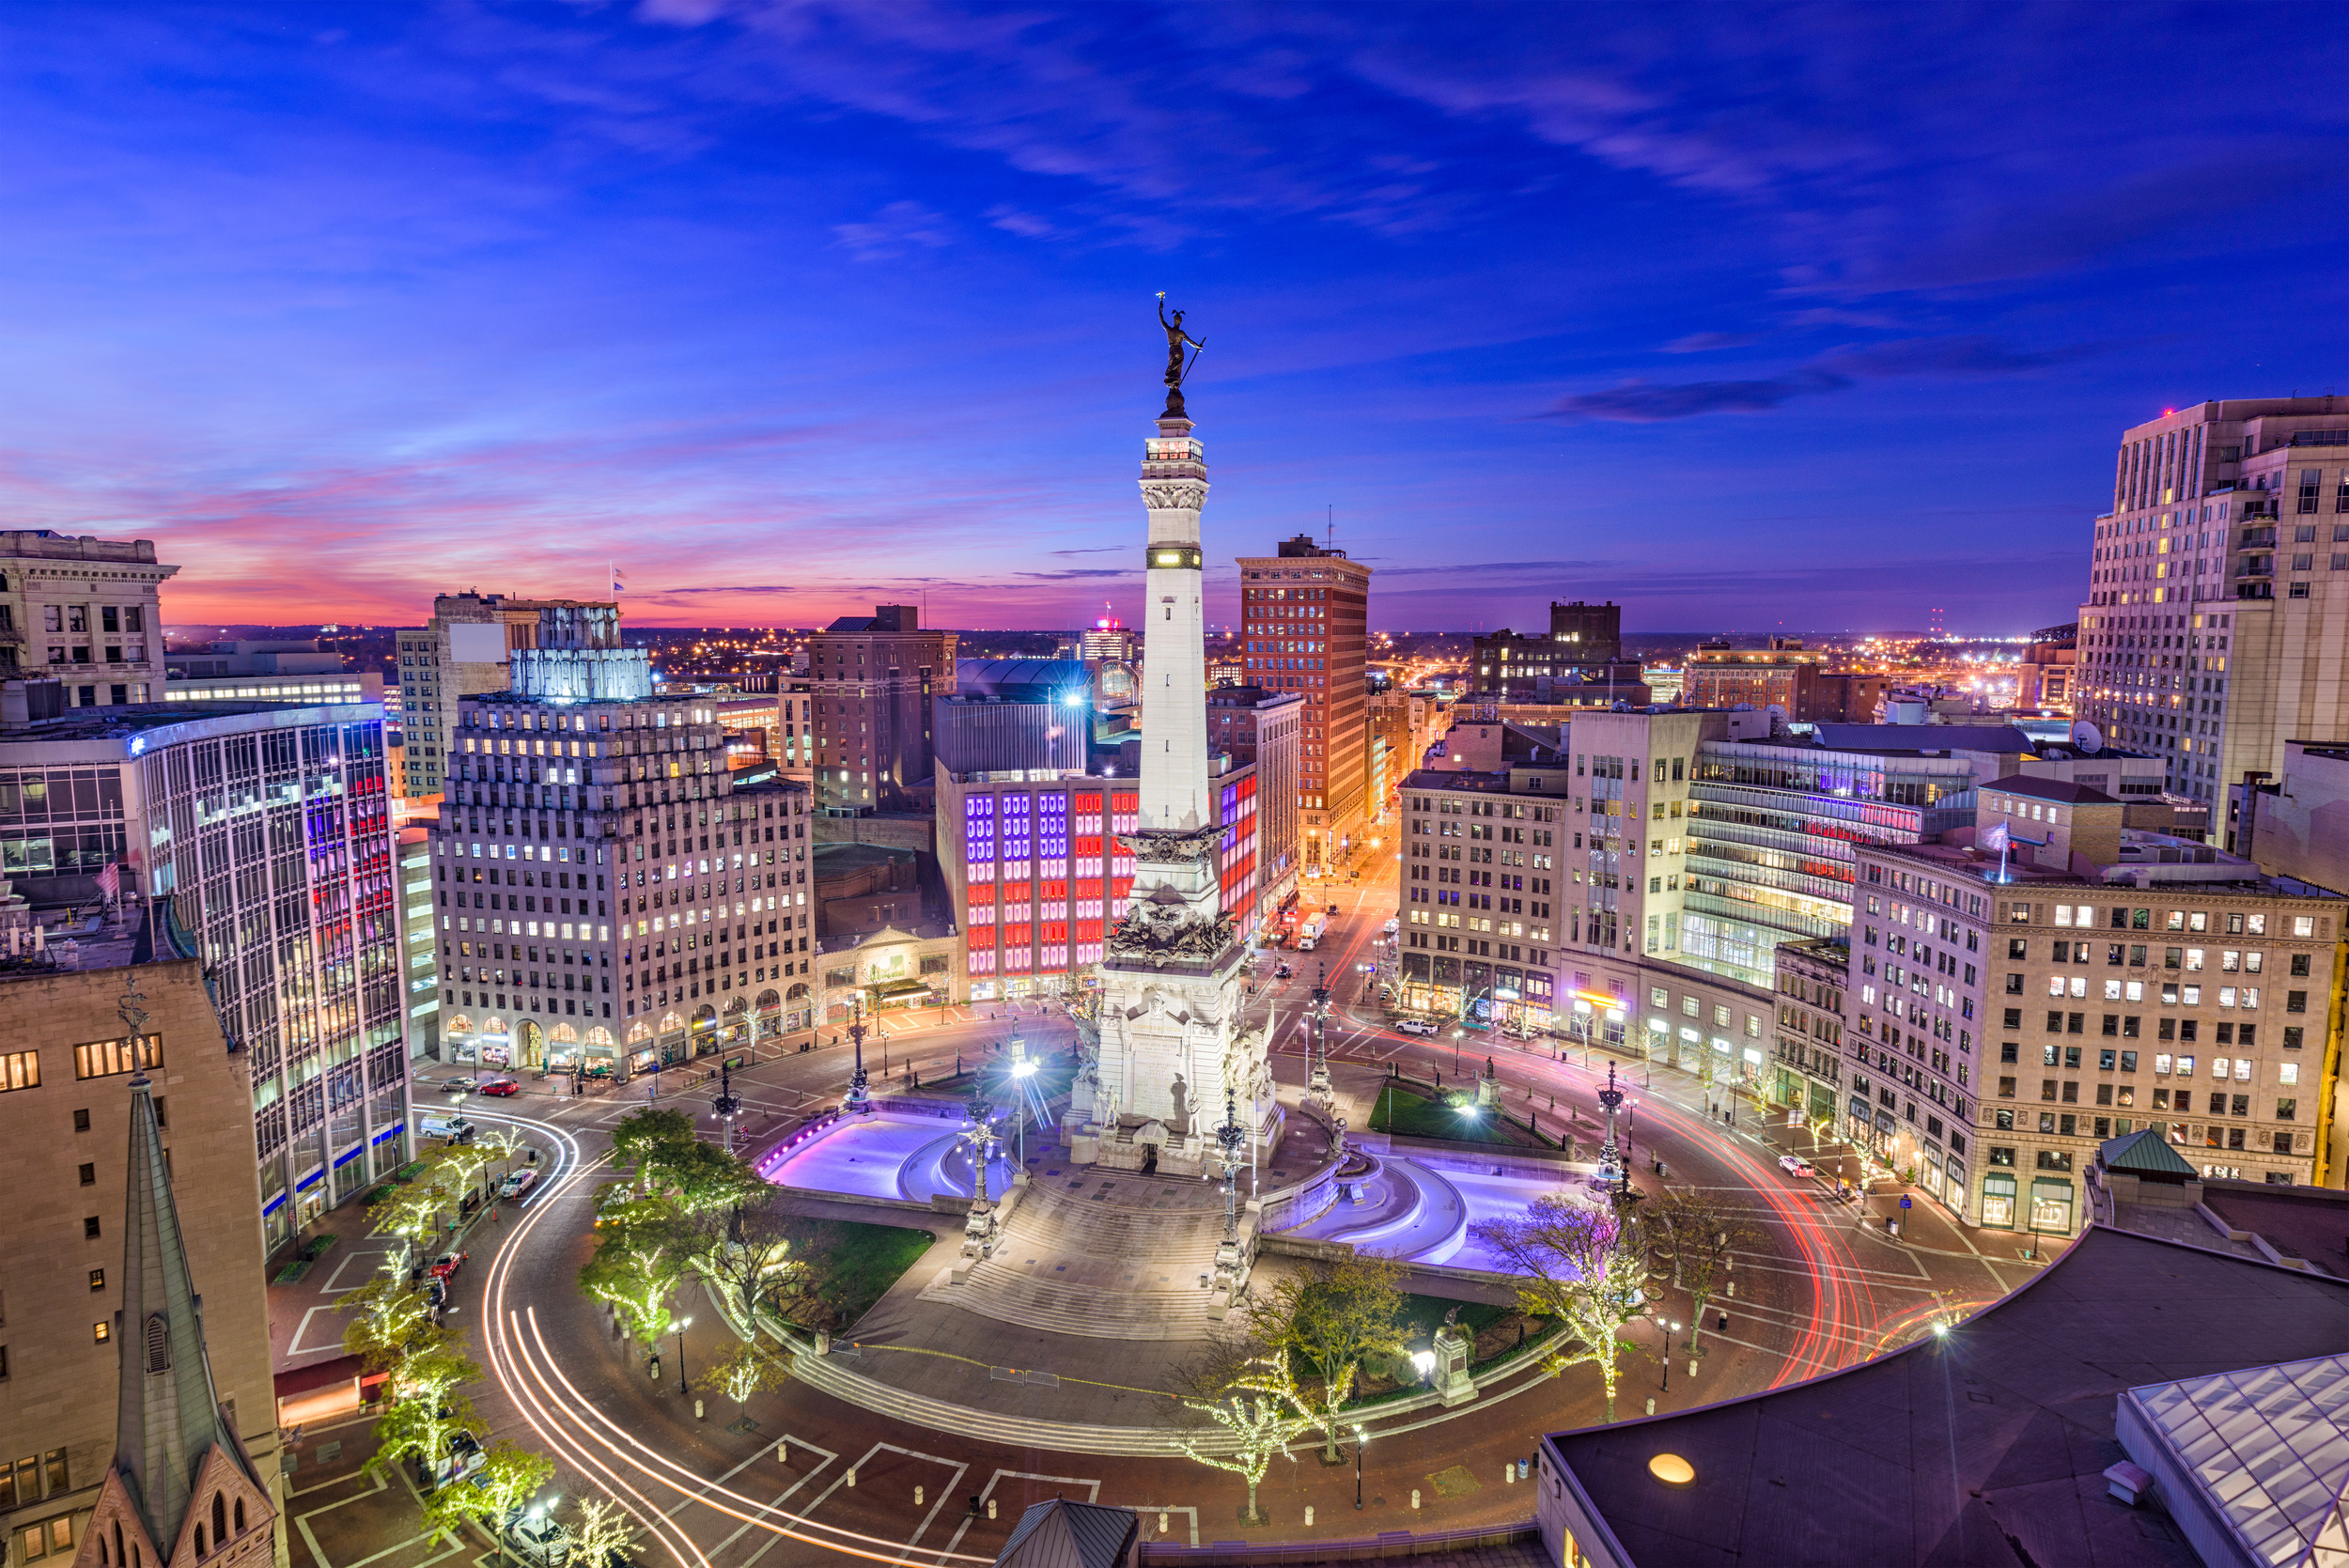 <p>Indianapolis is one of those United States cities that can feel like a big city or a small town, depending on how you approach it. For a city feel at night, look for its cocktail bars and clubs. For a small-town vibe, opt for its dive bars and off-beat establishments. </p><p><a href='https://www.msn.com/en-us/community/channel/vid-cj9pqbr0vn9in2b6ddcd8sfgpfq6x6utp44fssrv6mc2gtybw0us'>Did you enjoy this slideshow? Follow us on MSN to see more of our exclusive lifestyle content.</a></p>